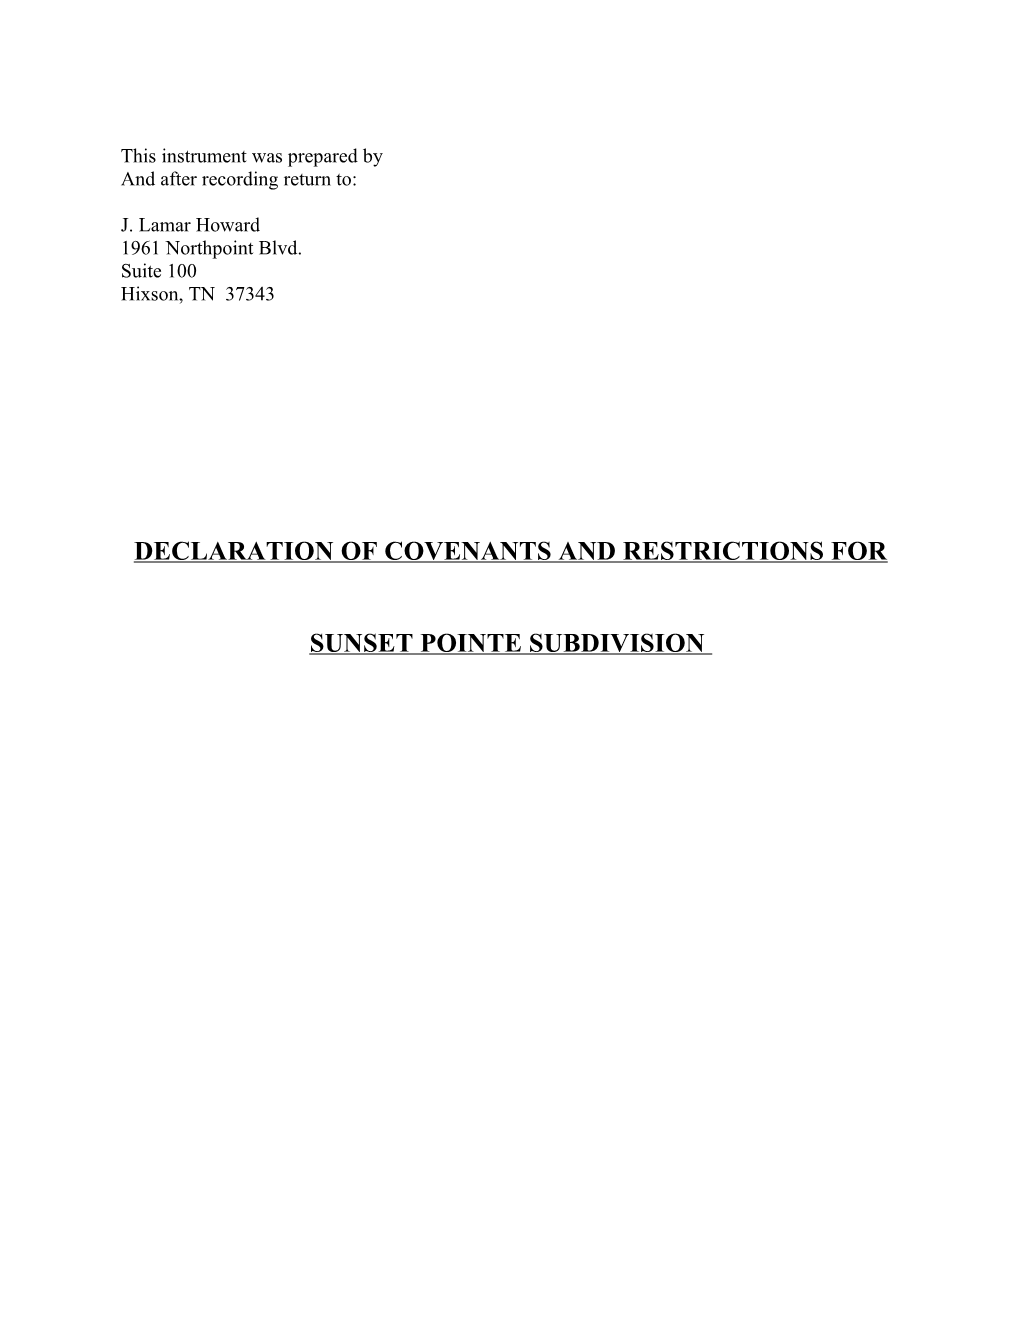 Declaration of Covenants and Restrictions for Southland Pointe Subdivision